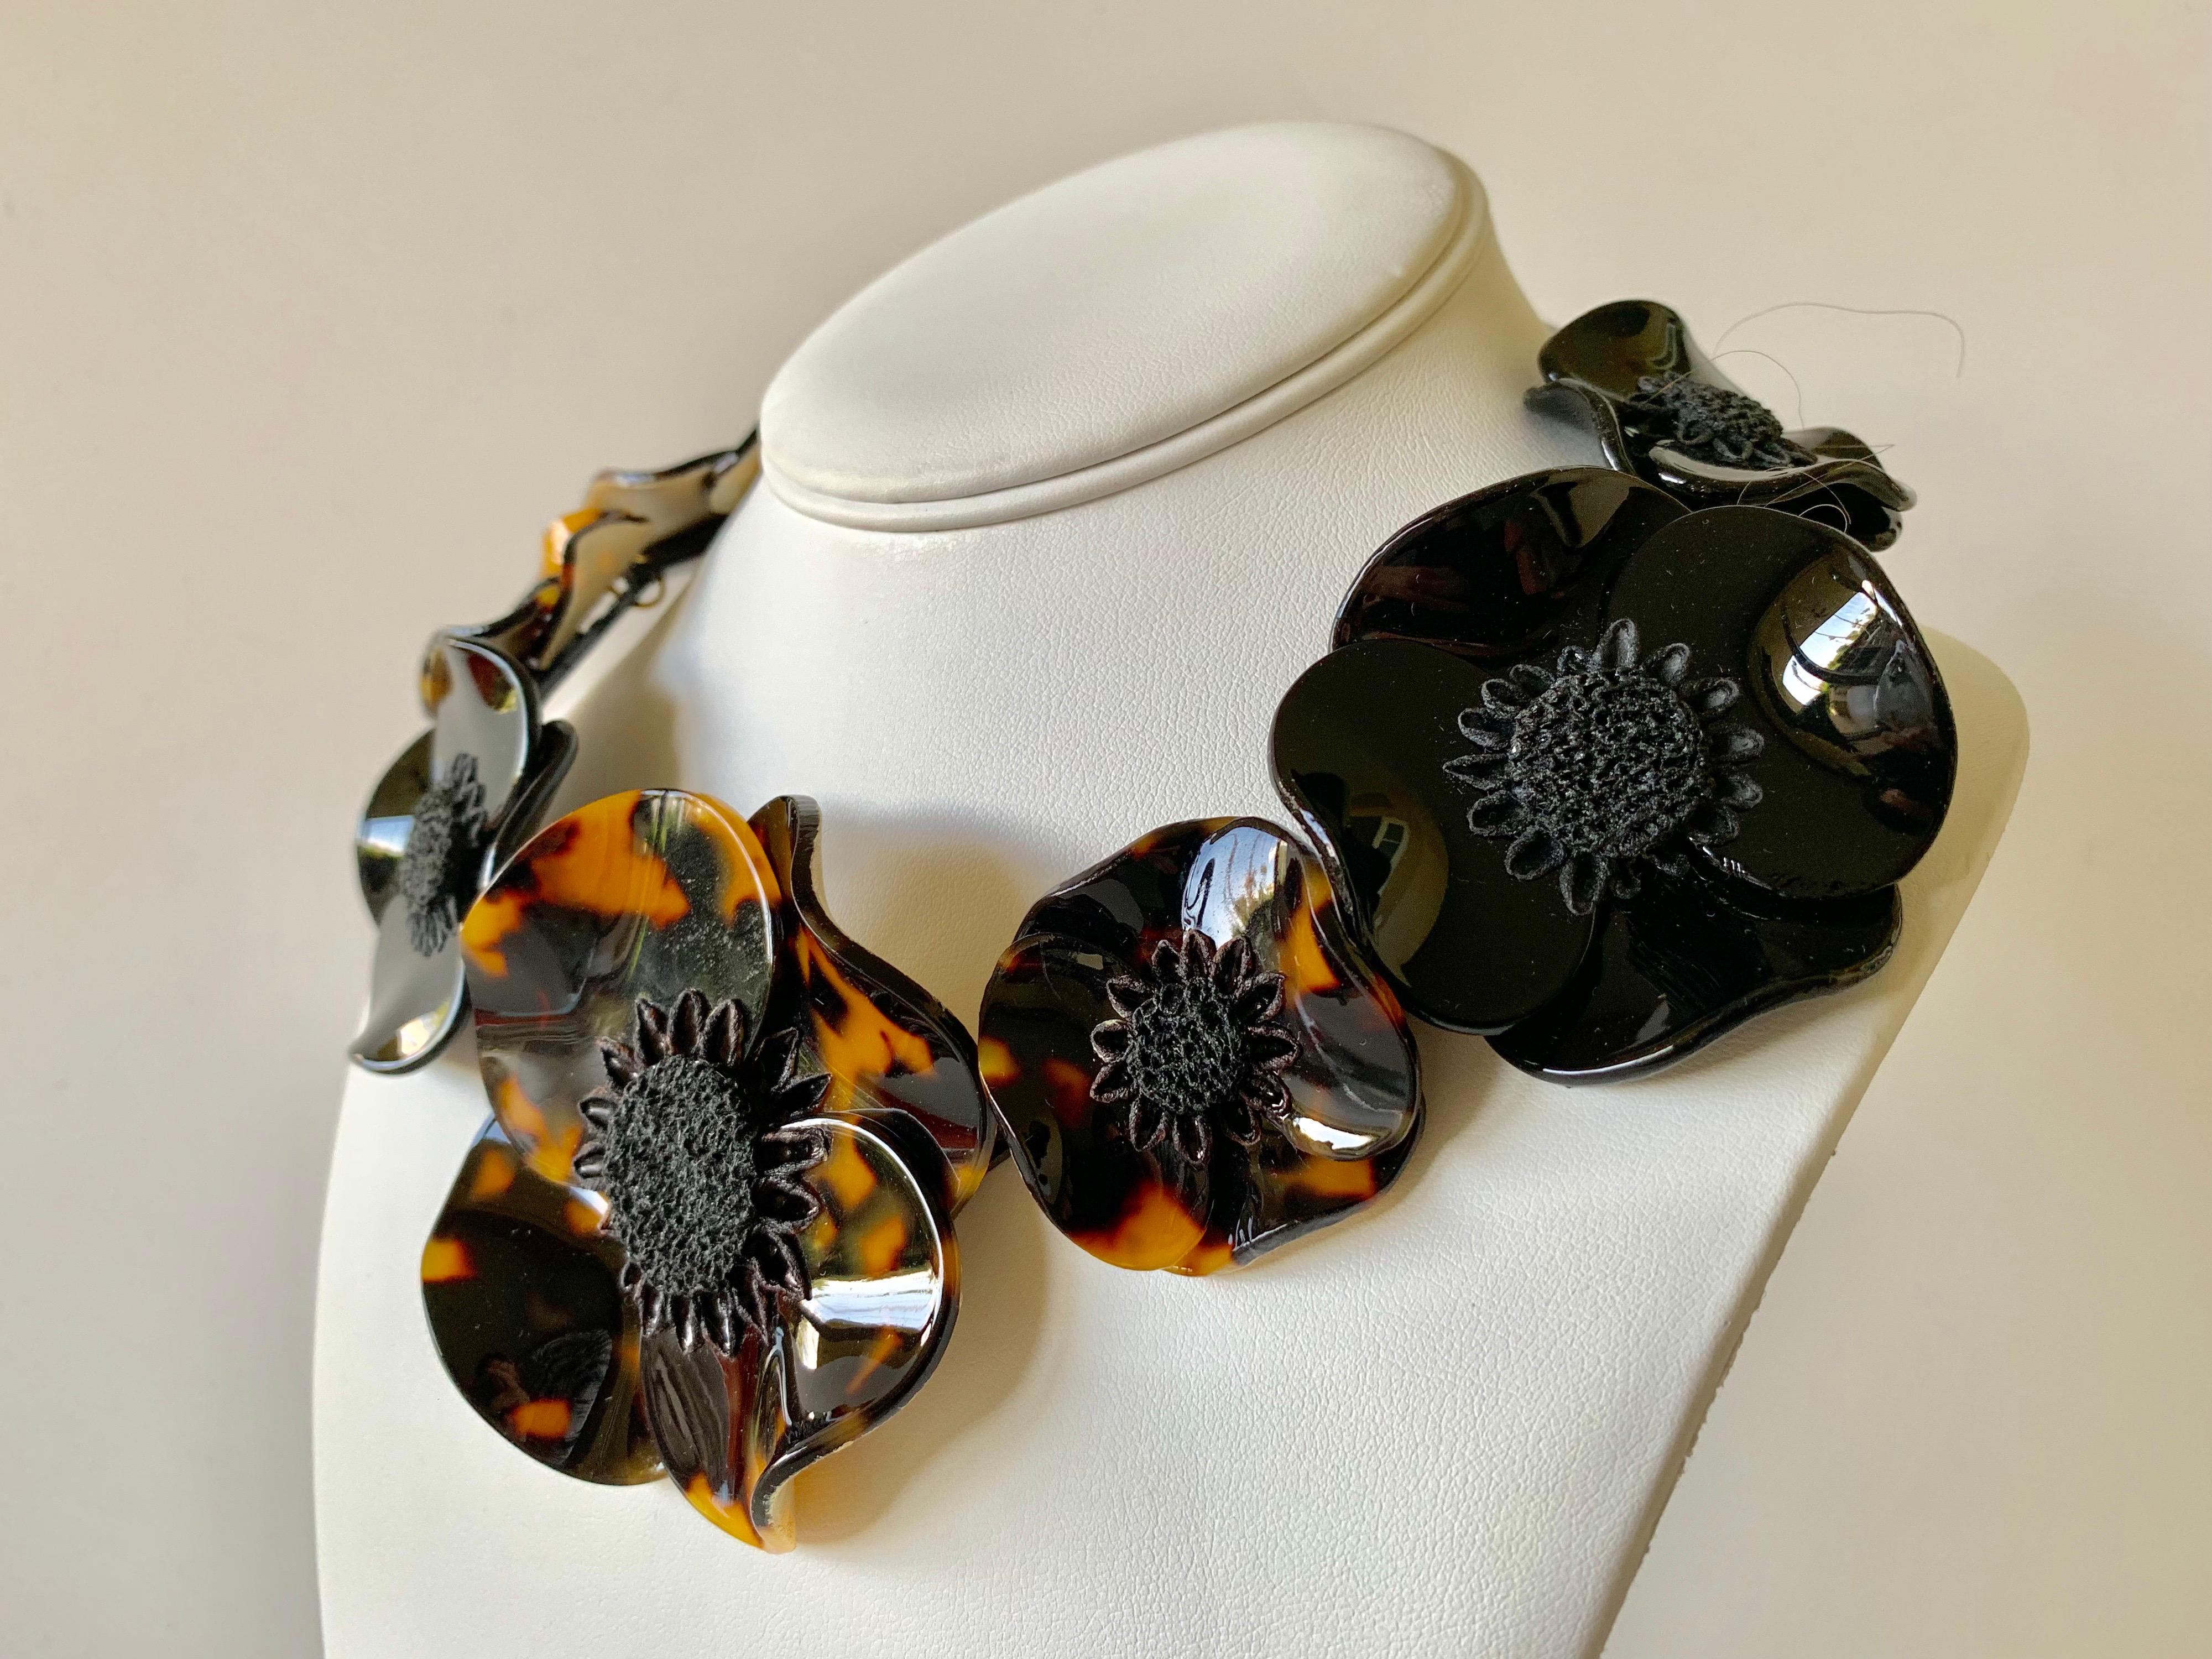 Light and easy to wear, the contemporary handmade adjustable artisanal necklace was made in Paris by Cilea. The statement necklace features seven architectural enameline (enamel and resin composite) poppy flowers in black and tortoise. The poppies